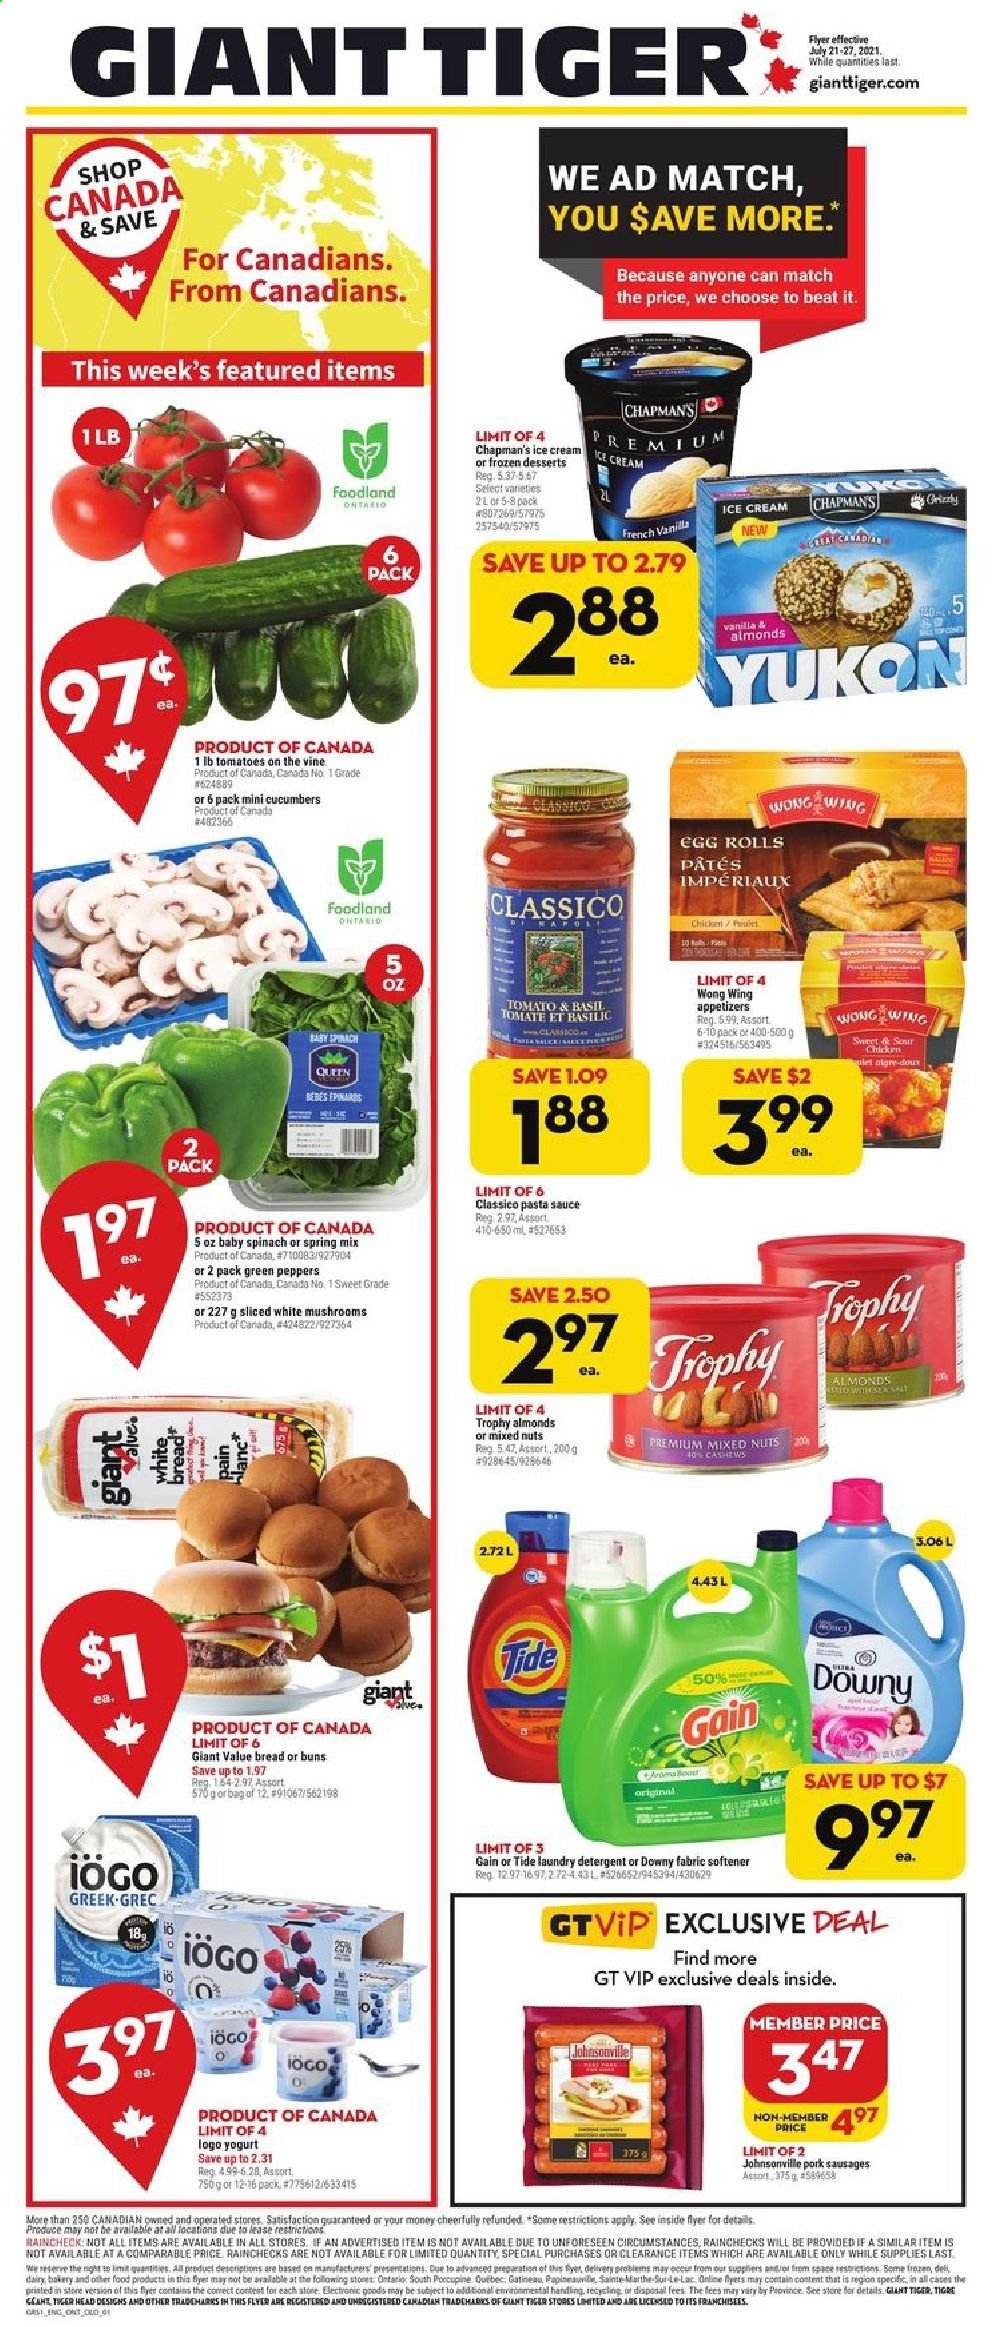 thumbnail - Giant Tiger Flyer - July 21, 2021 - July 27, 2021 - Sales products - mushrooms, bread, buns, cucumber, tomatoes, peppers, pasta sauce, sauce, egg rolls, Johnsonville, sausage, yoghurt, ice cream, Classico, almonds, cashews, mixed nuts, Gain, Tide, fabric softener, laundry detergent, Downy Laundry, bag, trophy cup. Page 1.